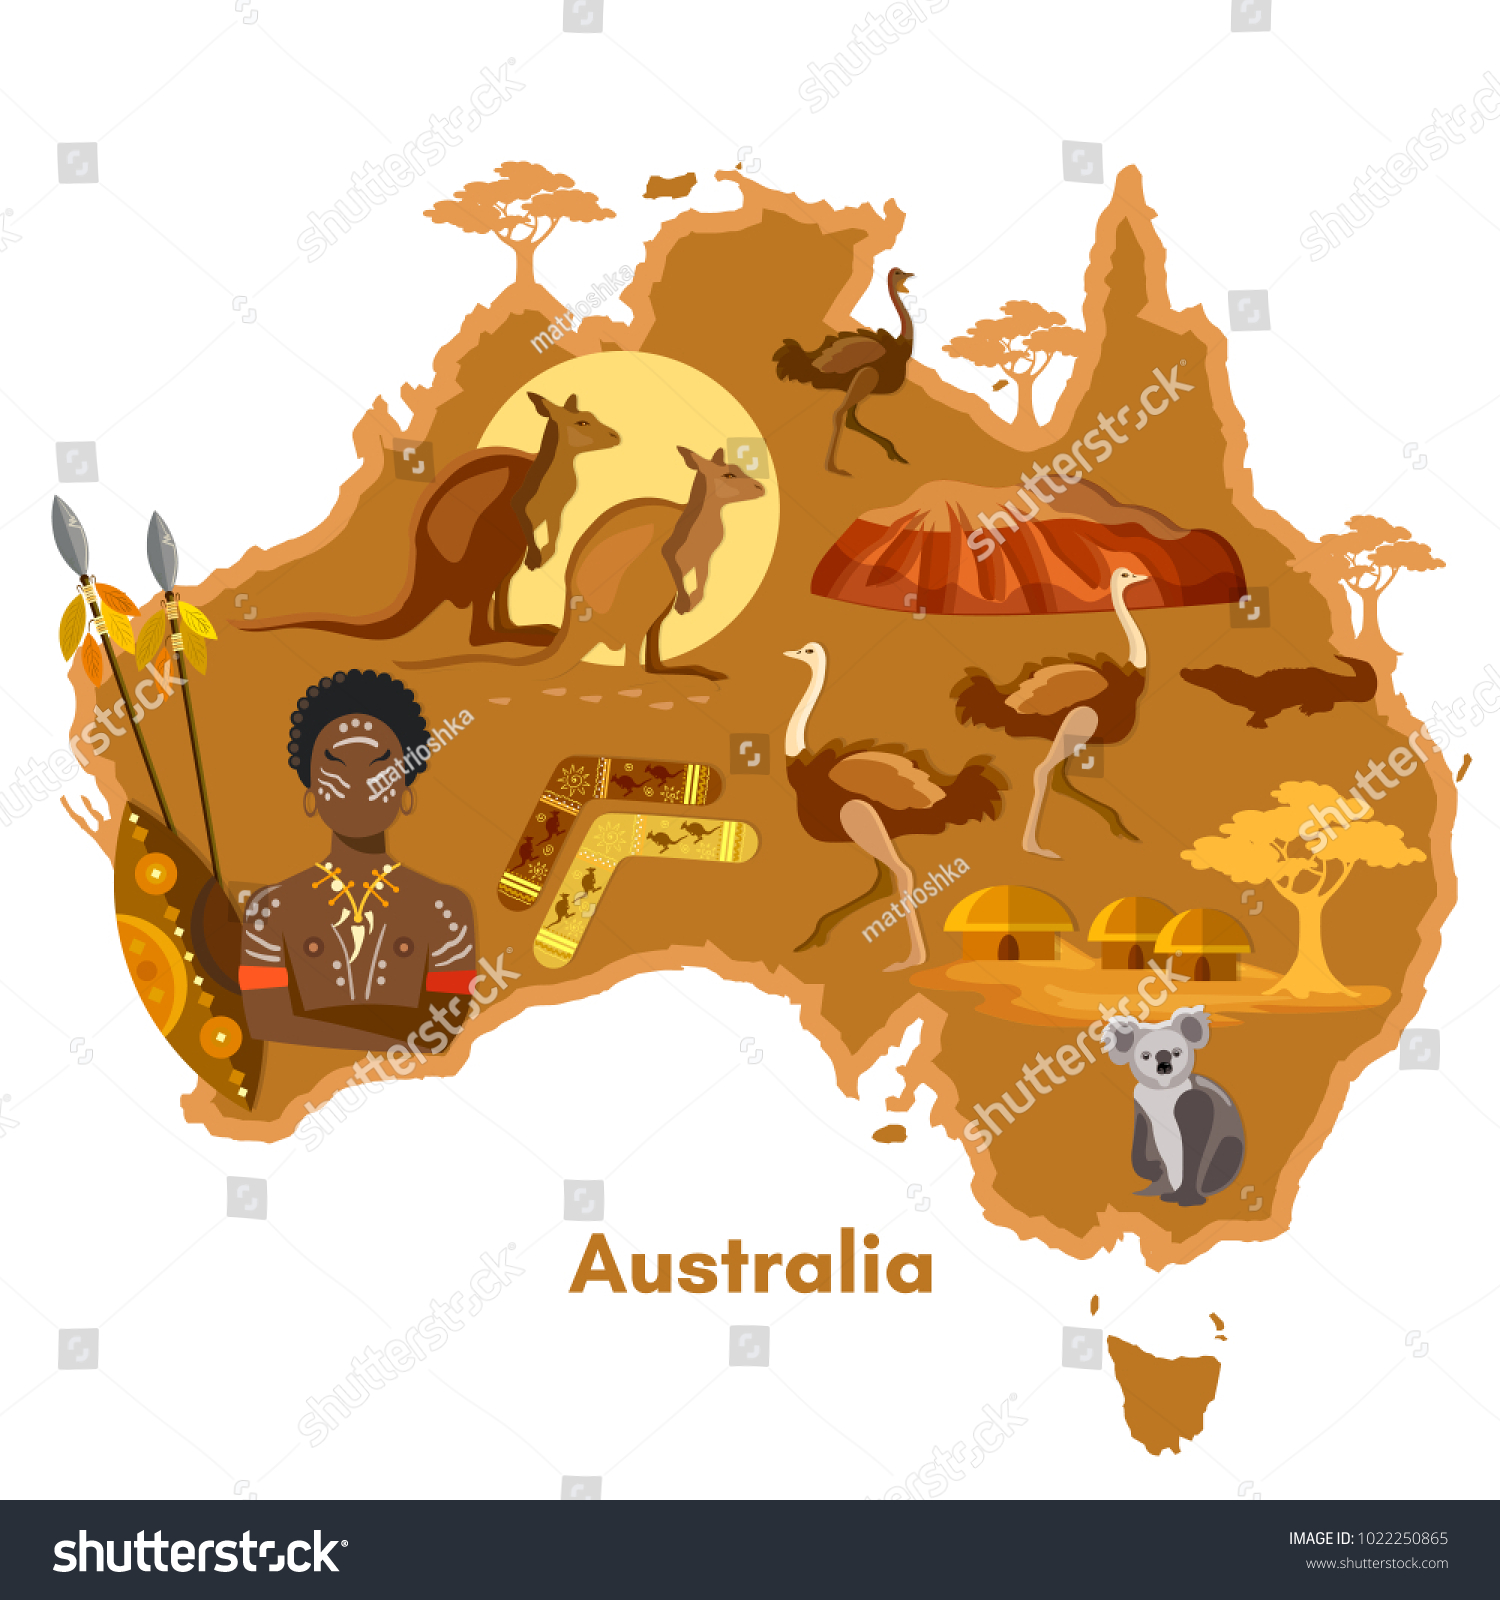 Australia Sights Culture Traditions Vector (Royalty Free) 1022250865